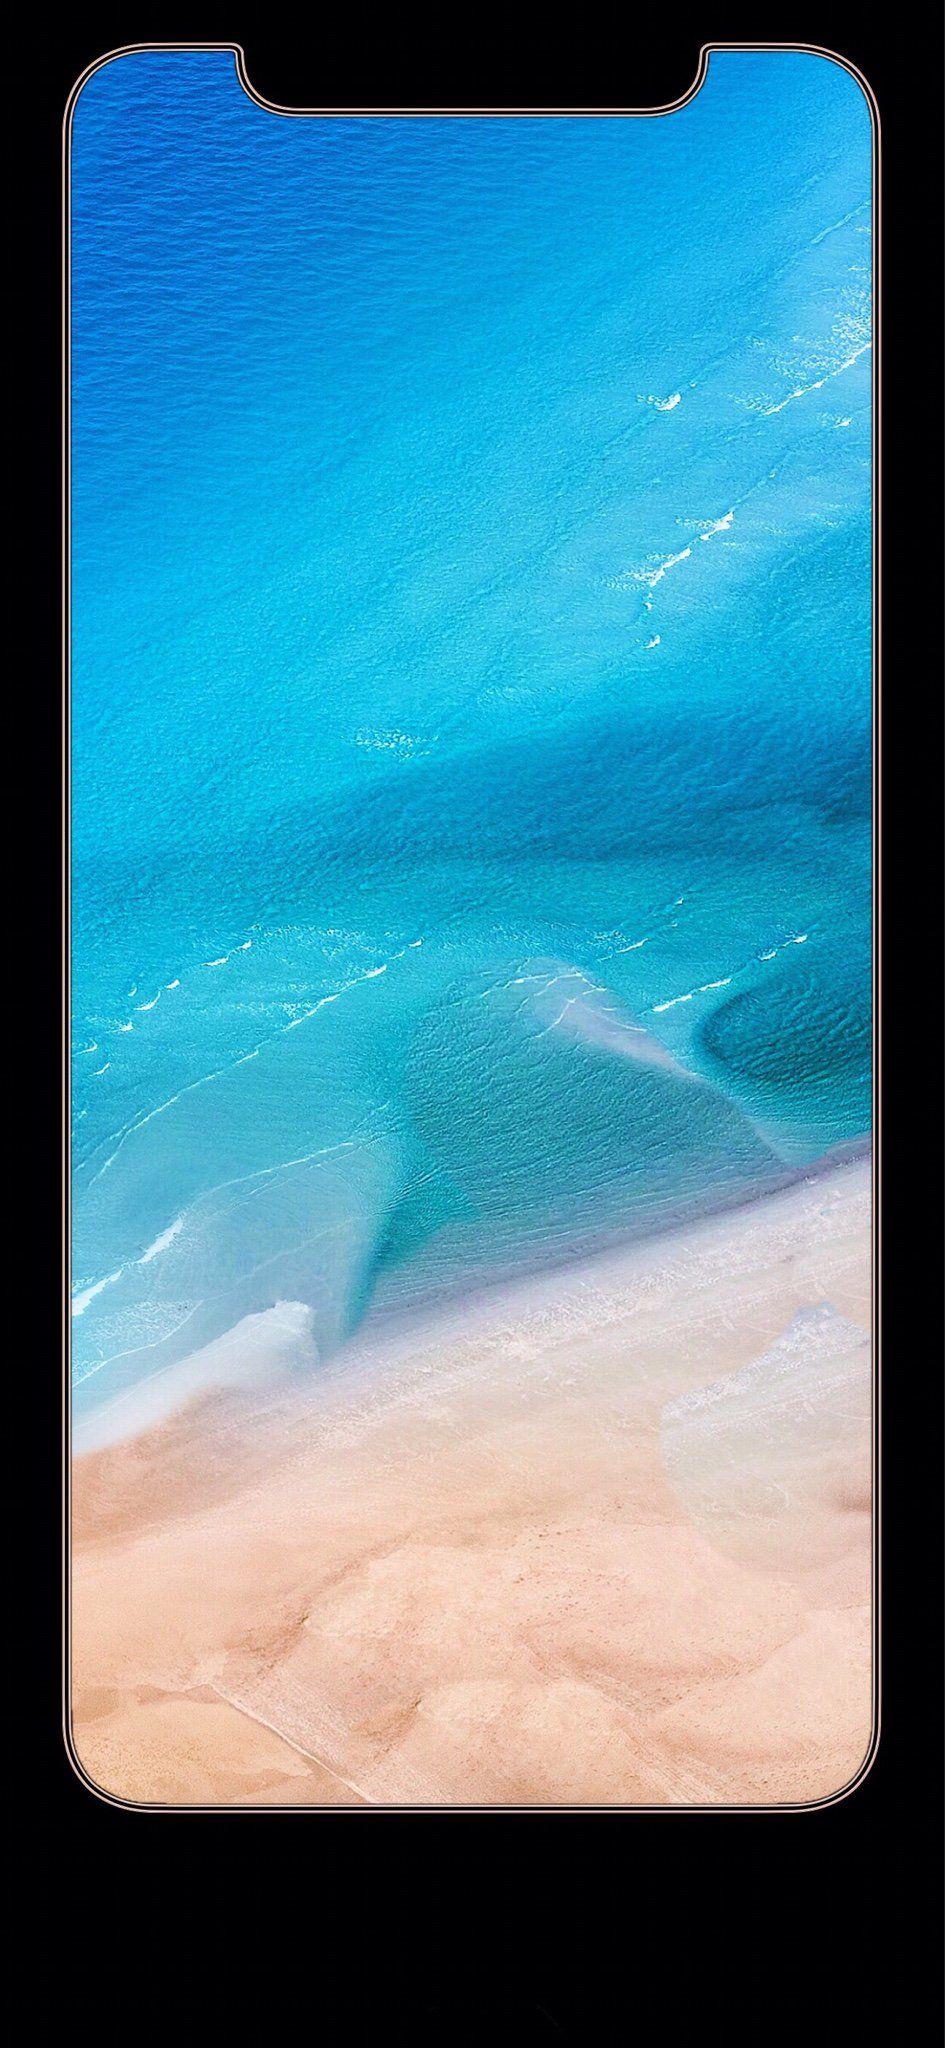 Notch Hd iPhone Wallpapers Free Download